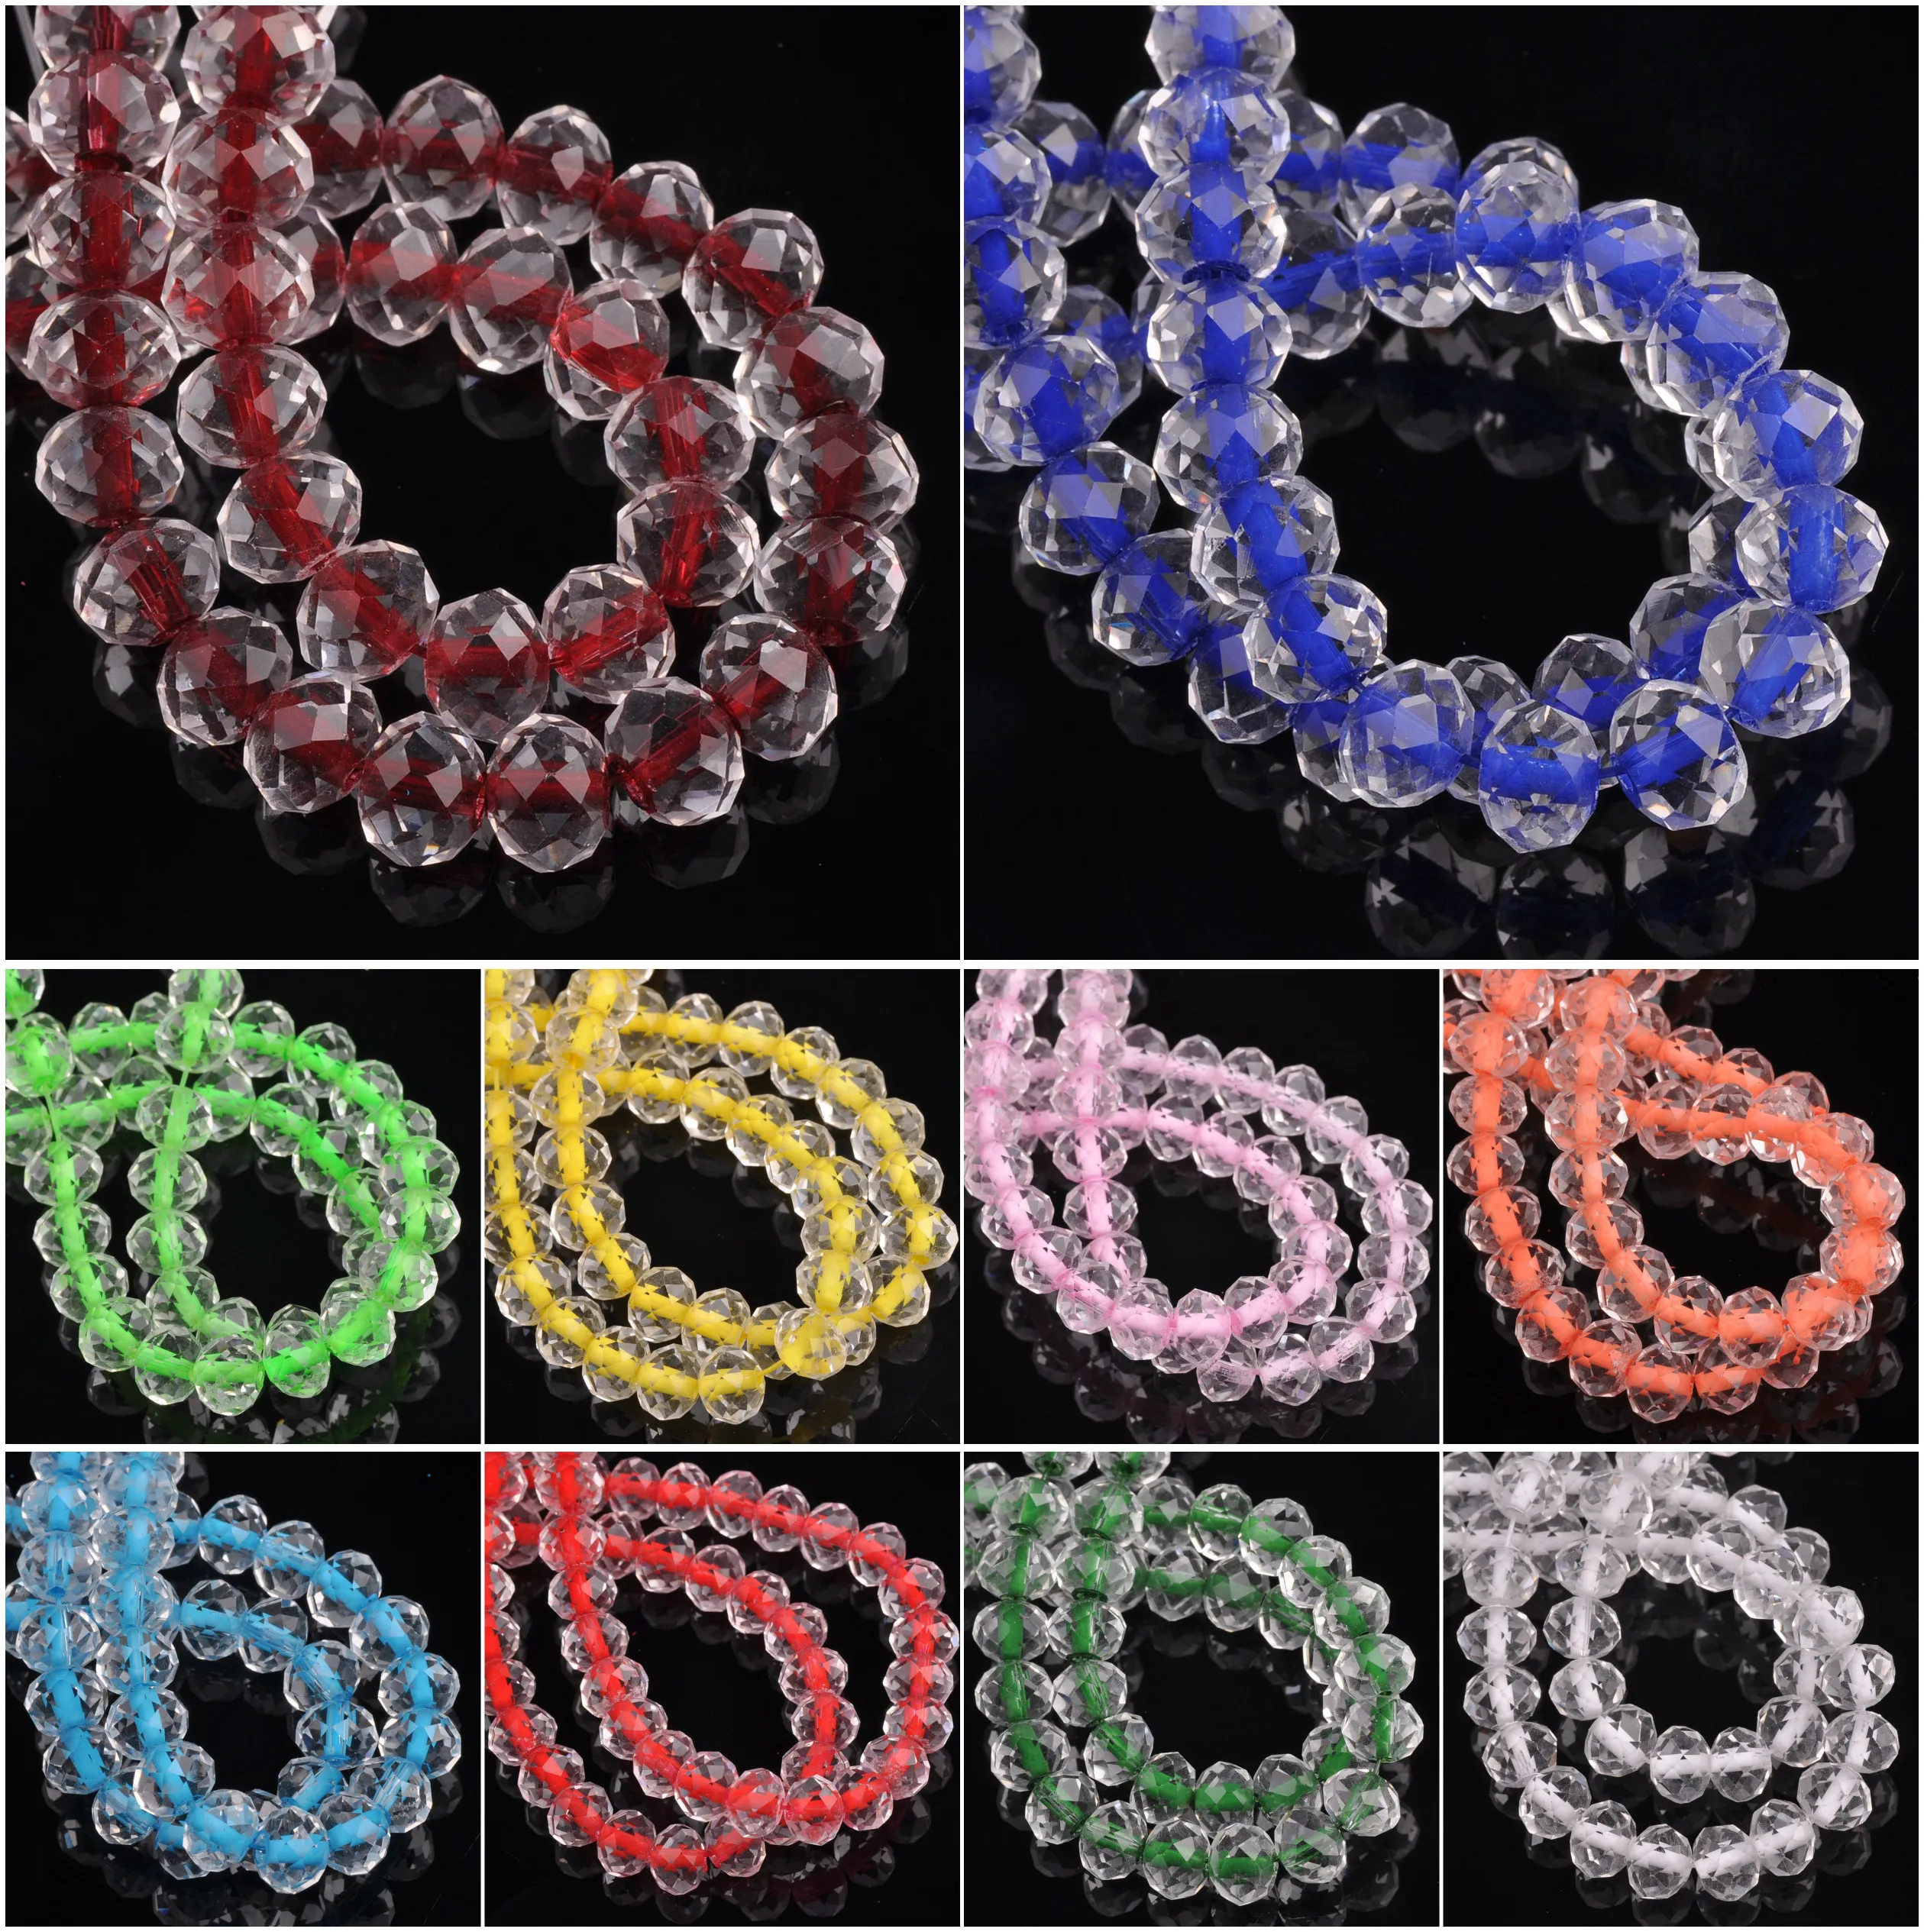 

Rondelle Faceted Crystal Glass Colorful Core 6x4mm 8x6mm Loose Spacer Beads Lot for Jewelry Making DIY Crafts Findings